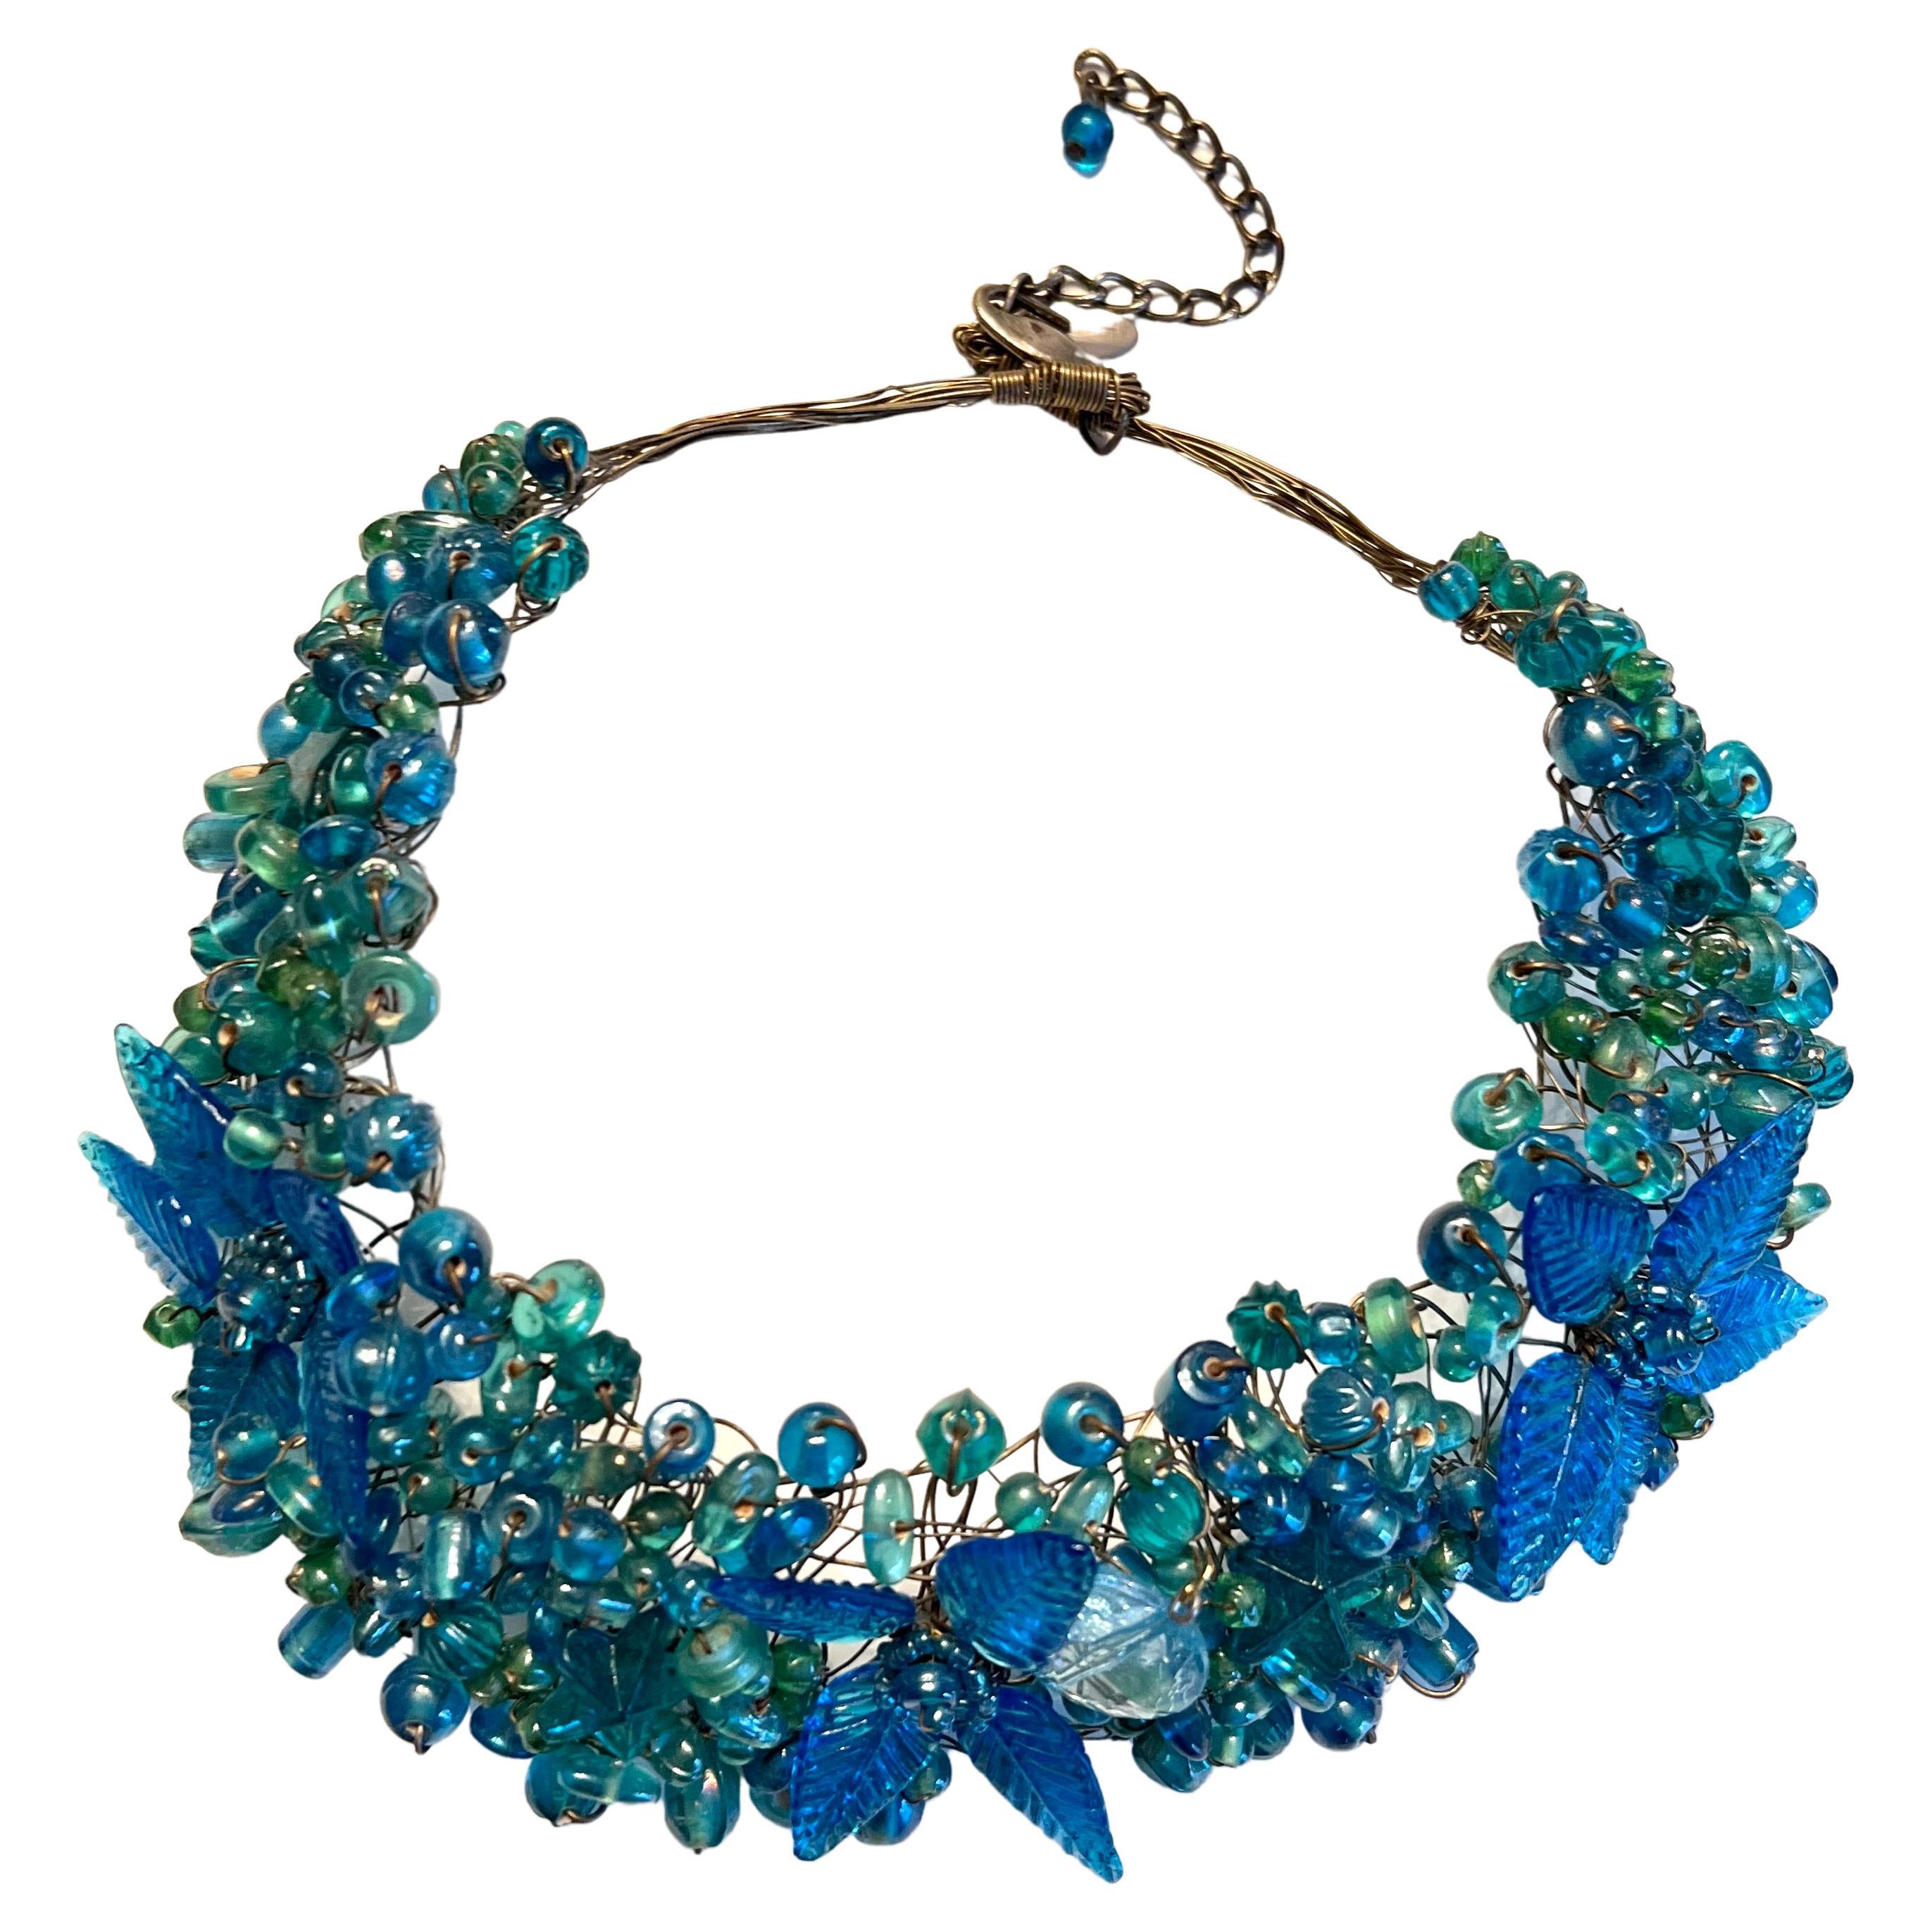 Necklace Chocker of Glass Cut Leaves and Berries